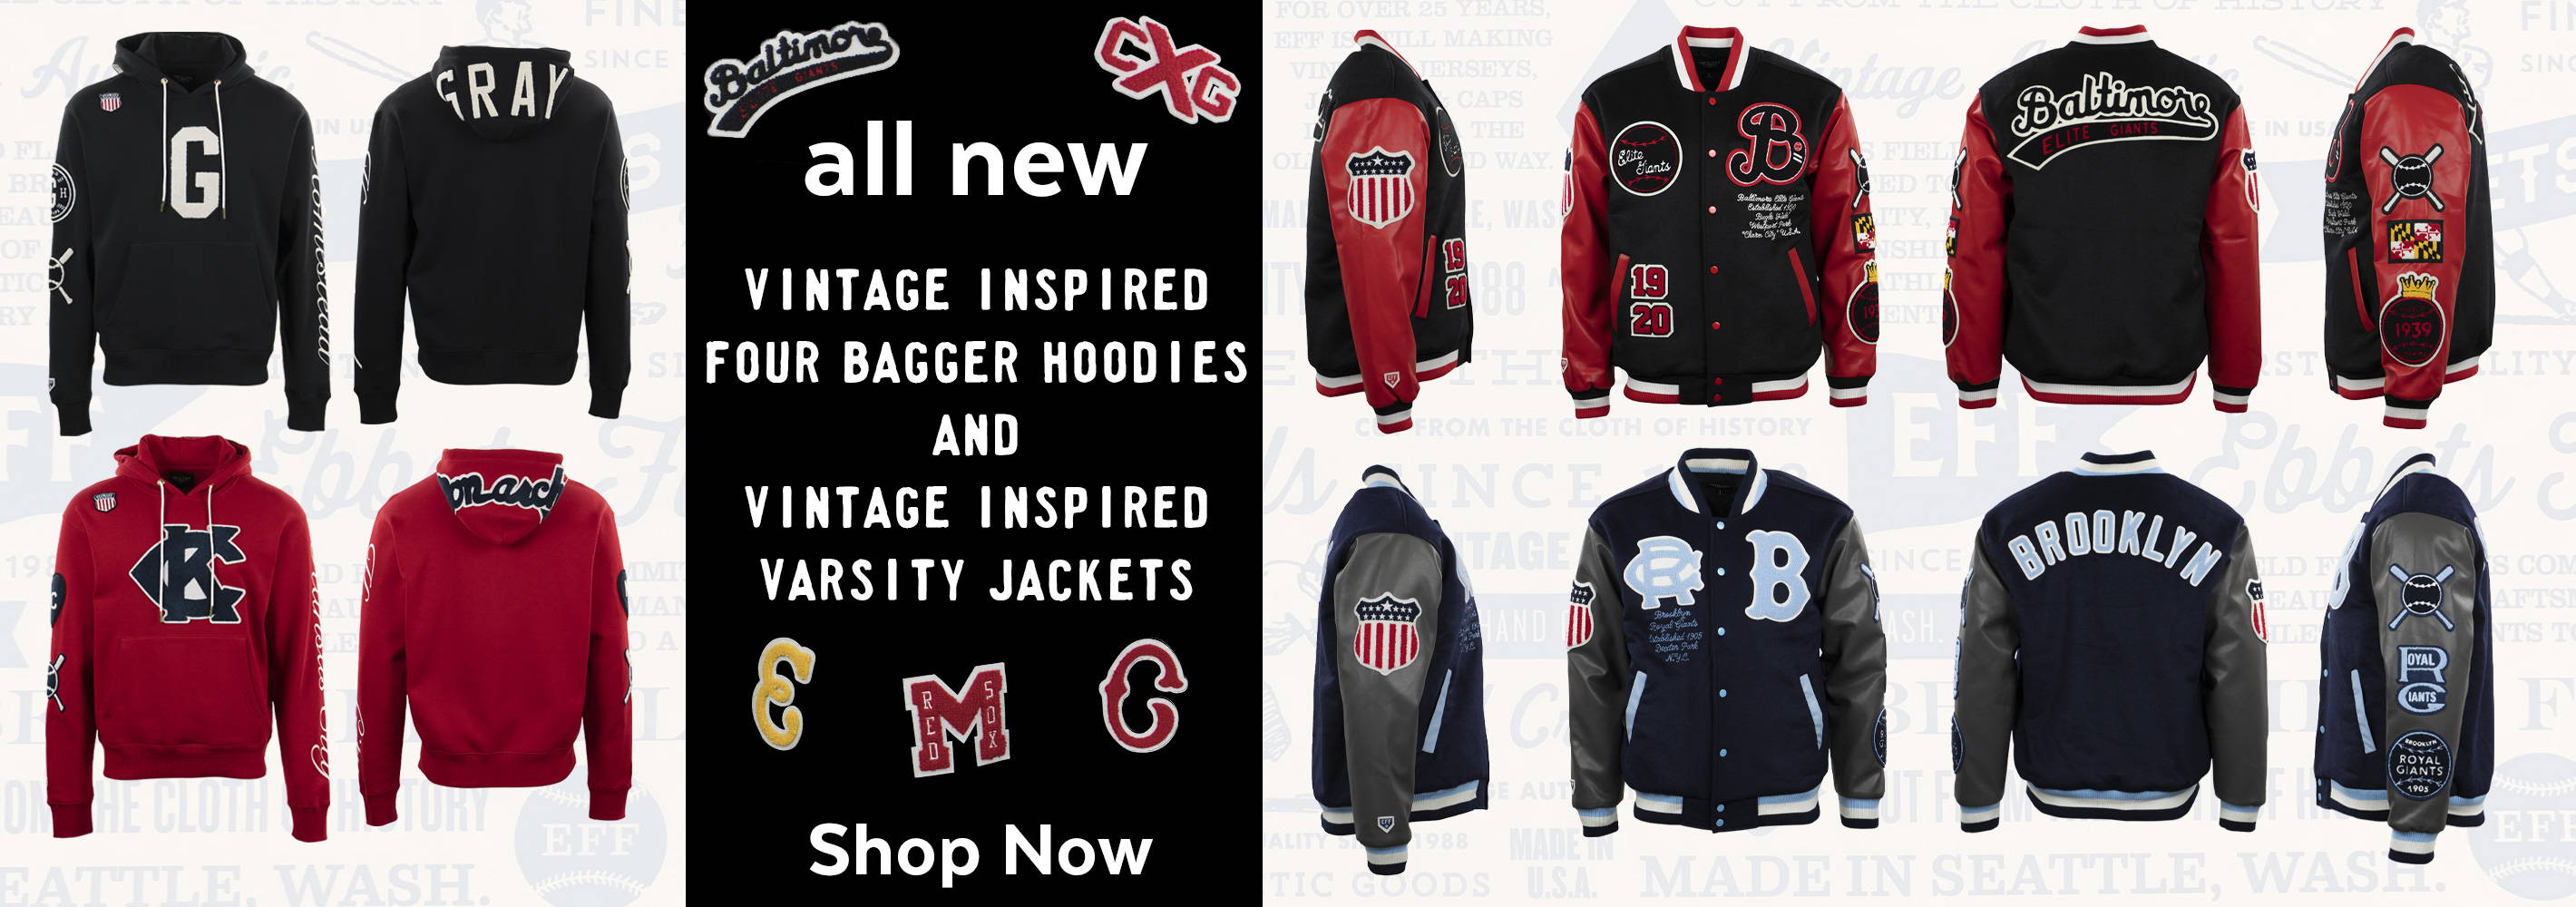 A graphic with pictures on the left side of the front and back of two sweatshirts - one red and one black -  featuring patches on the chest and hood. On the right are two varsity jackets - one navy blue with black sleeves and one black with red sleeves - with pictures showing the front back and sides to showcases the patches on them. In the center of the graphic is text that reads 